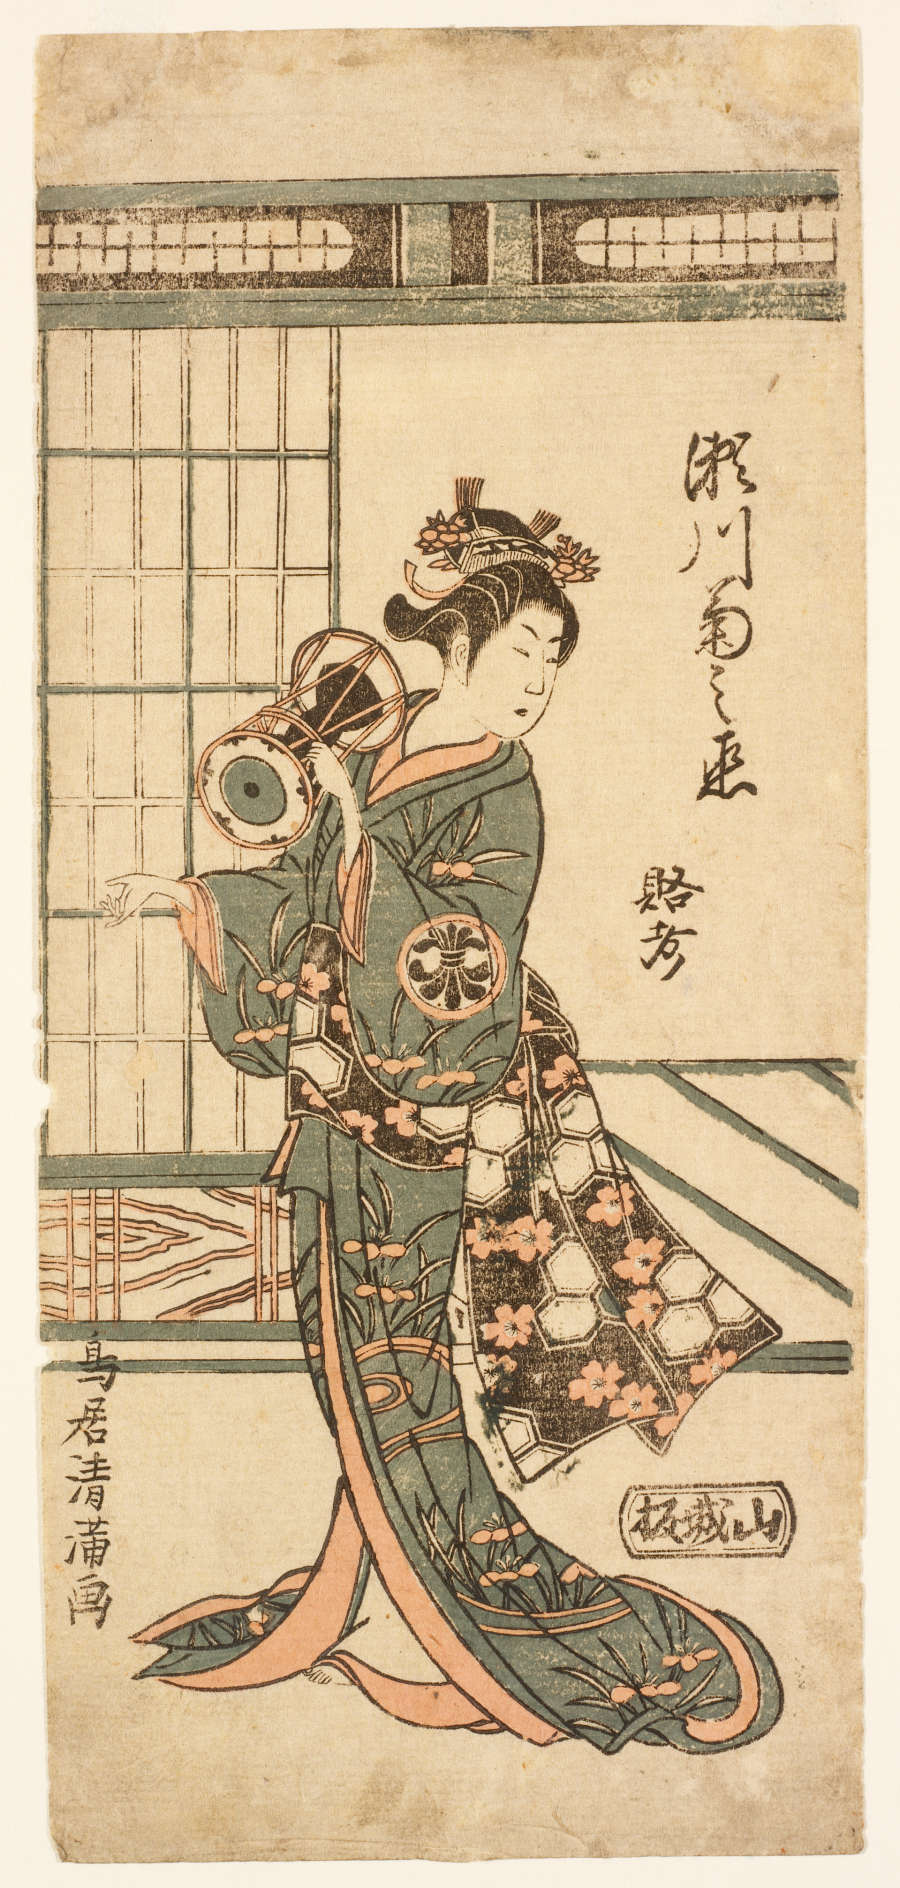 A muted red and green colored woodblock print of a Japanese actor playing a small hand drum. He is depicted in a room with a half-opened sliding door behind him.